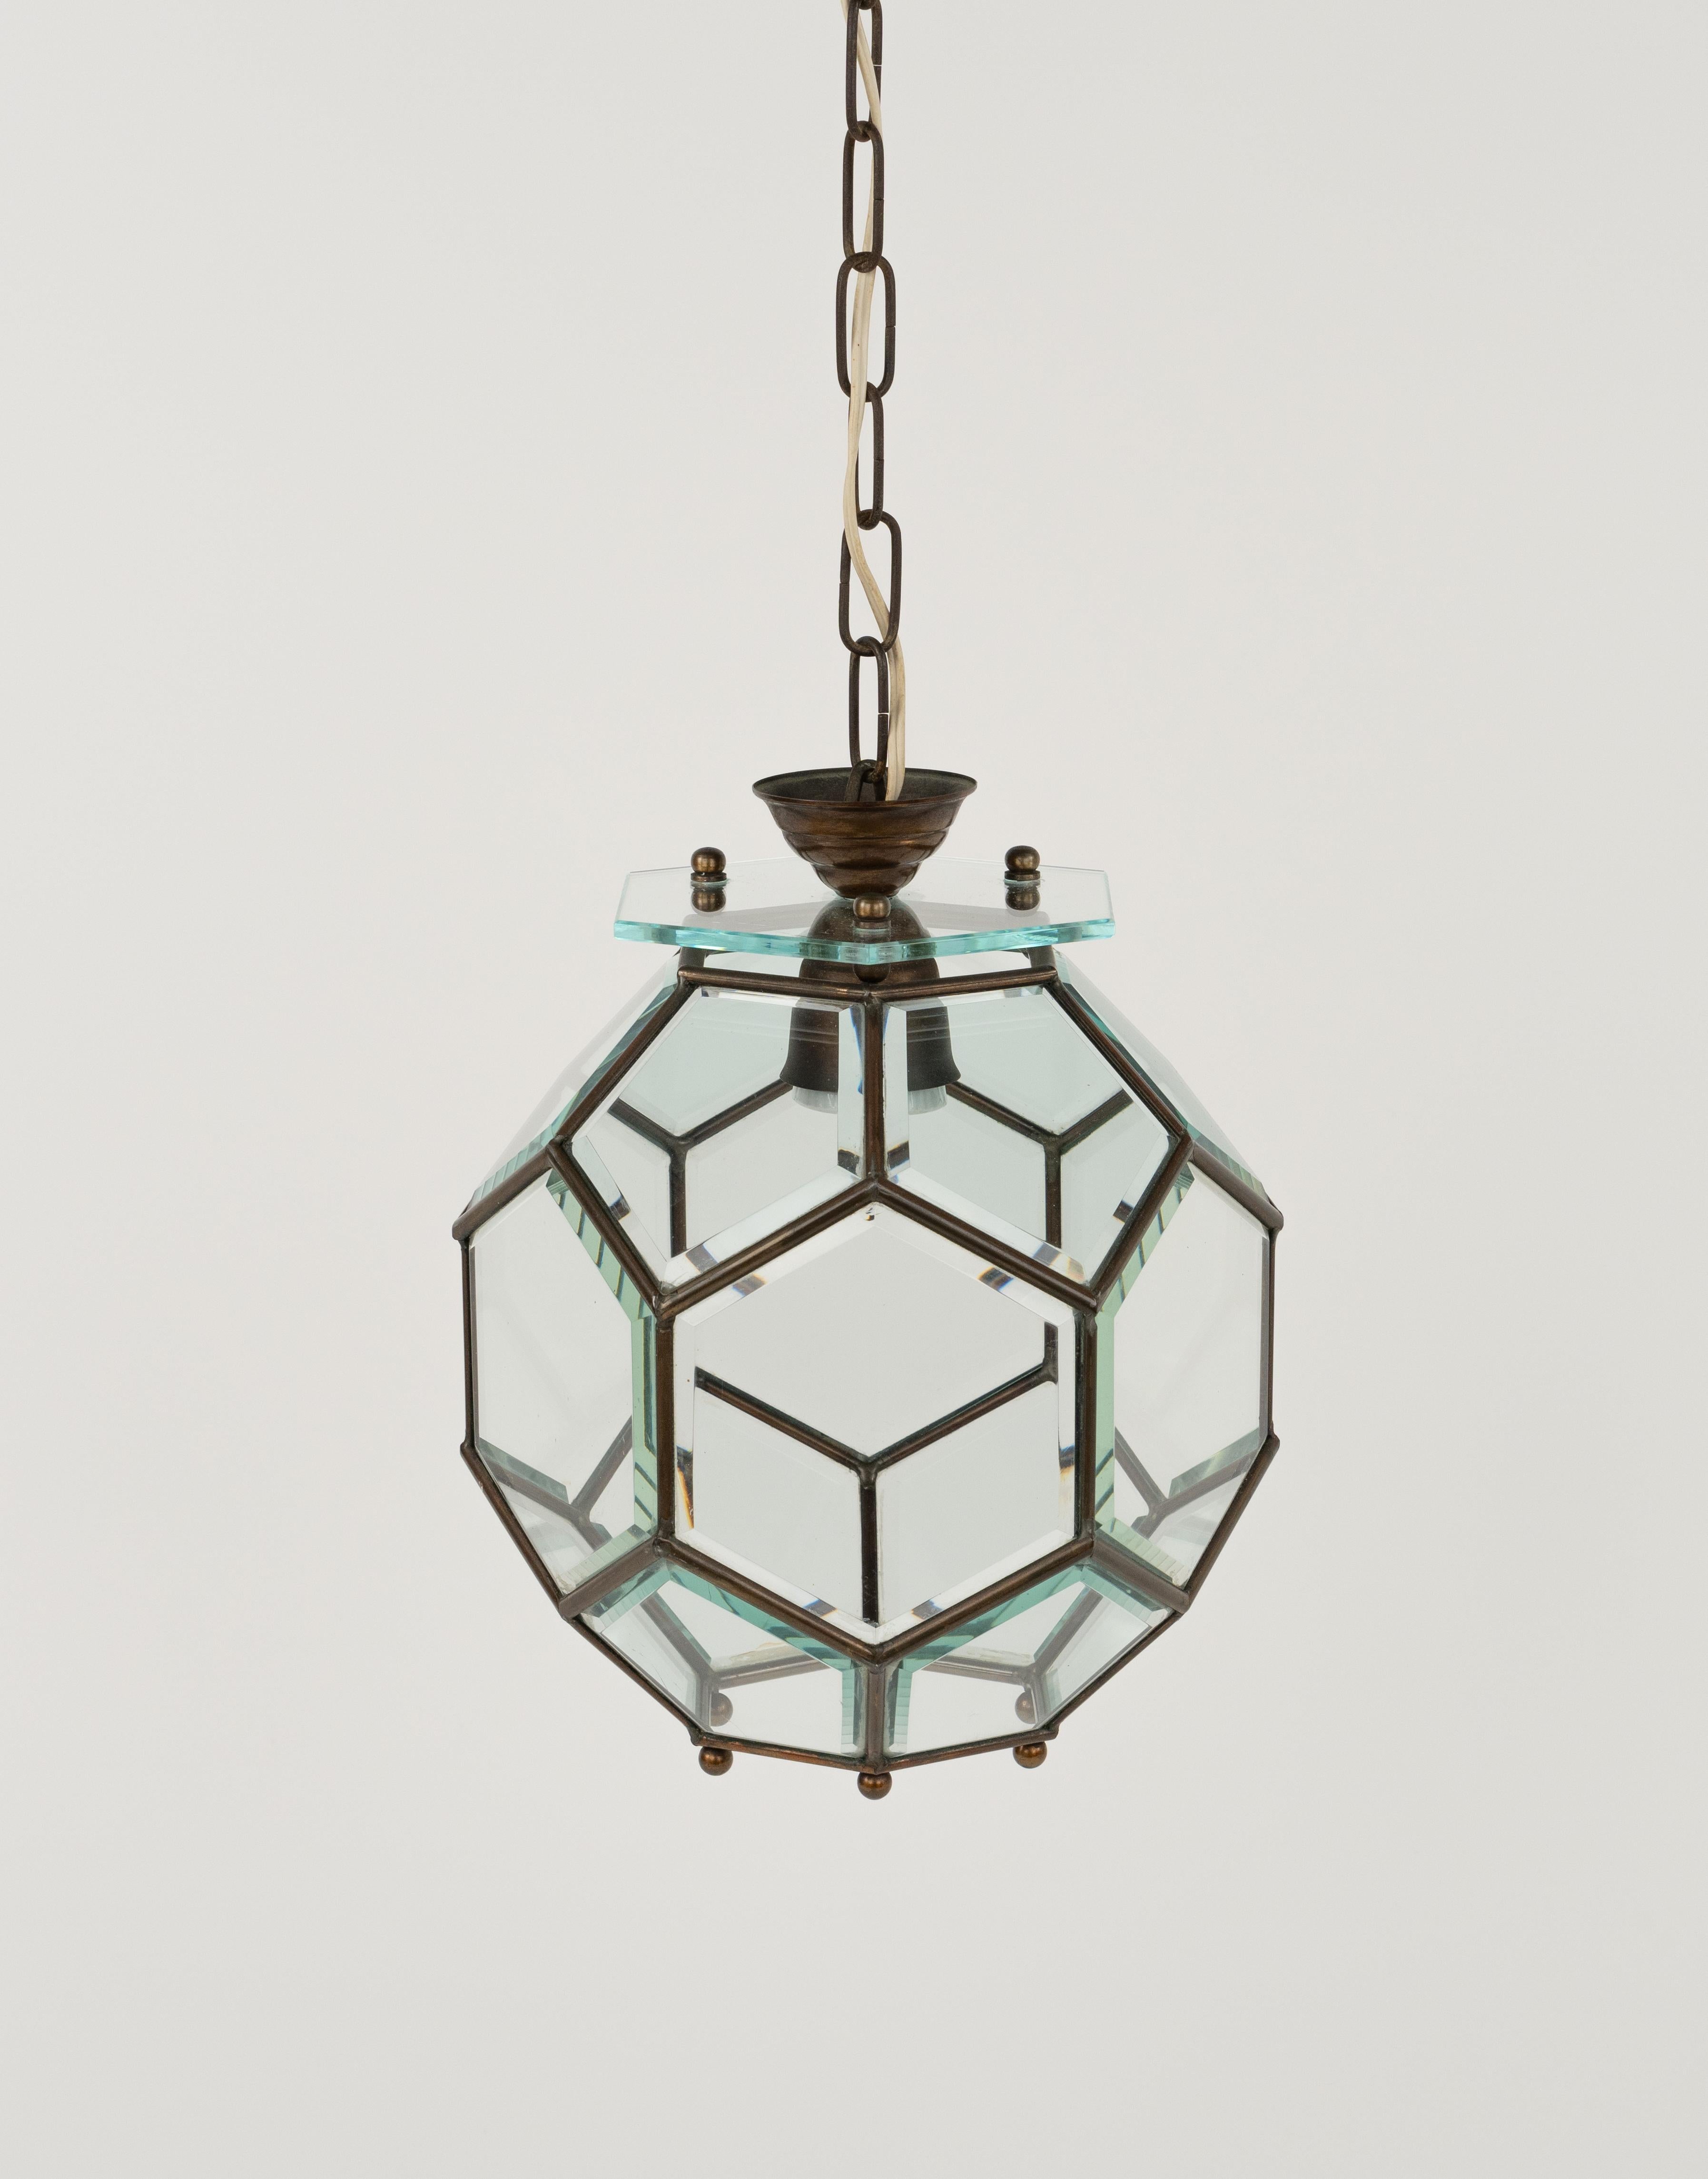 Midcentury Chandelier in Brass and Beveled Glass Adolf Loos Style, Italy 1950s For Sale 1